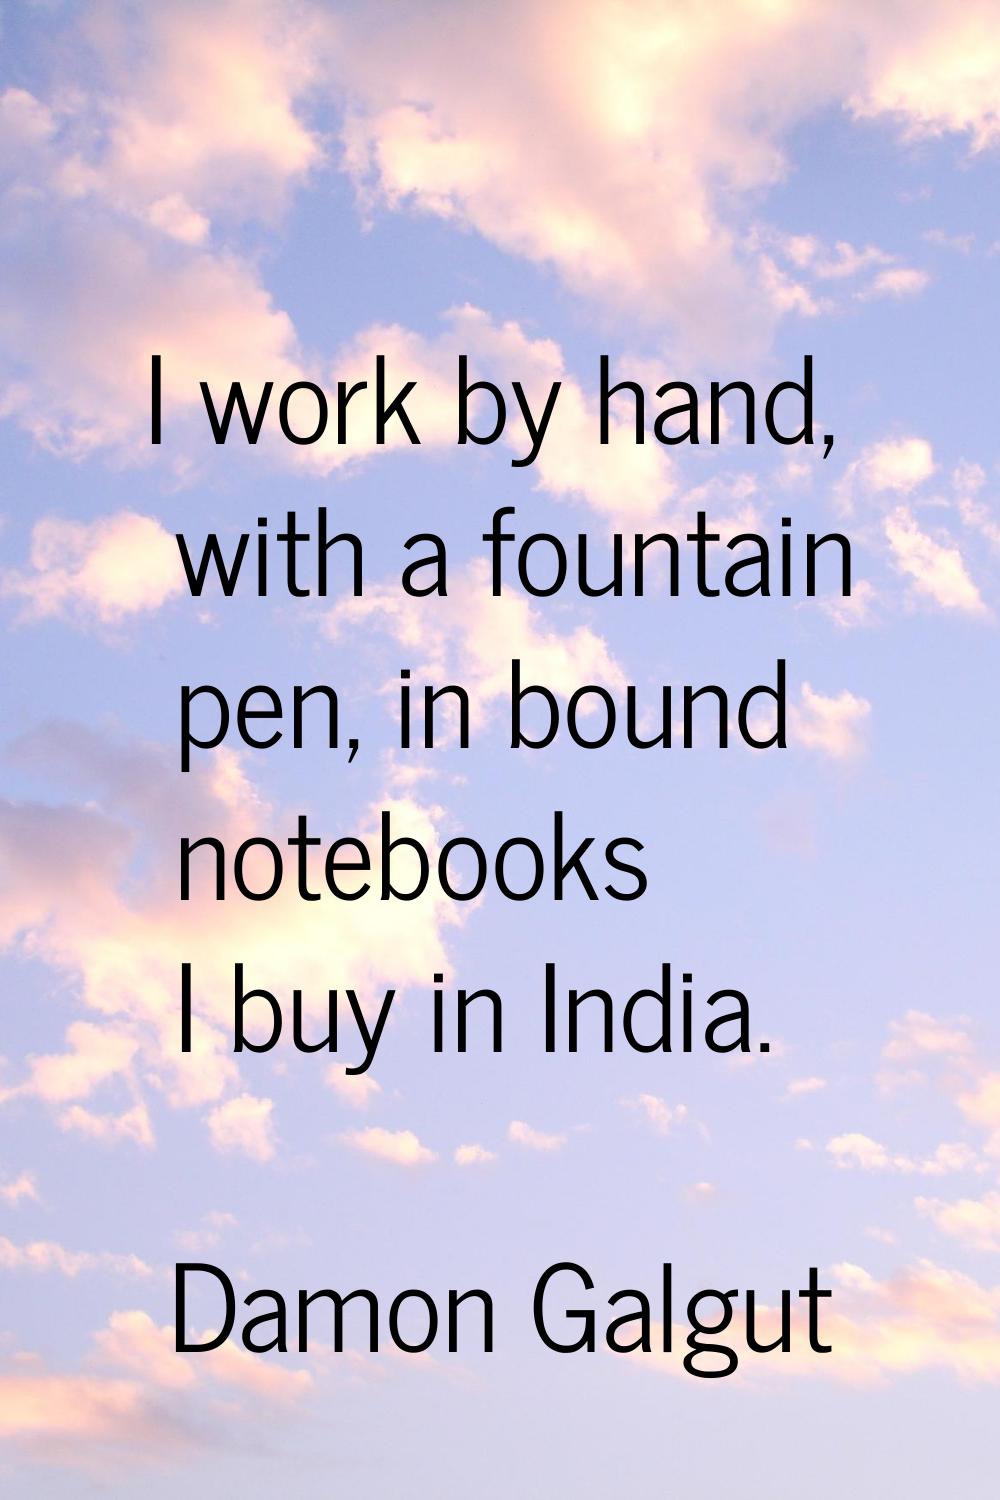 I work by hand, with a fountain pen, in bound notebooks I buy in India.